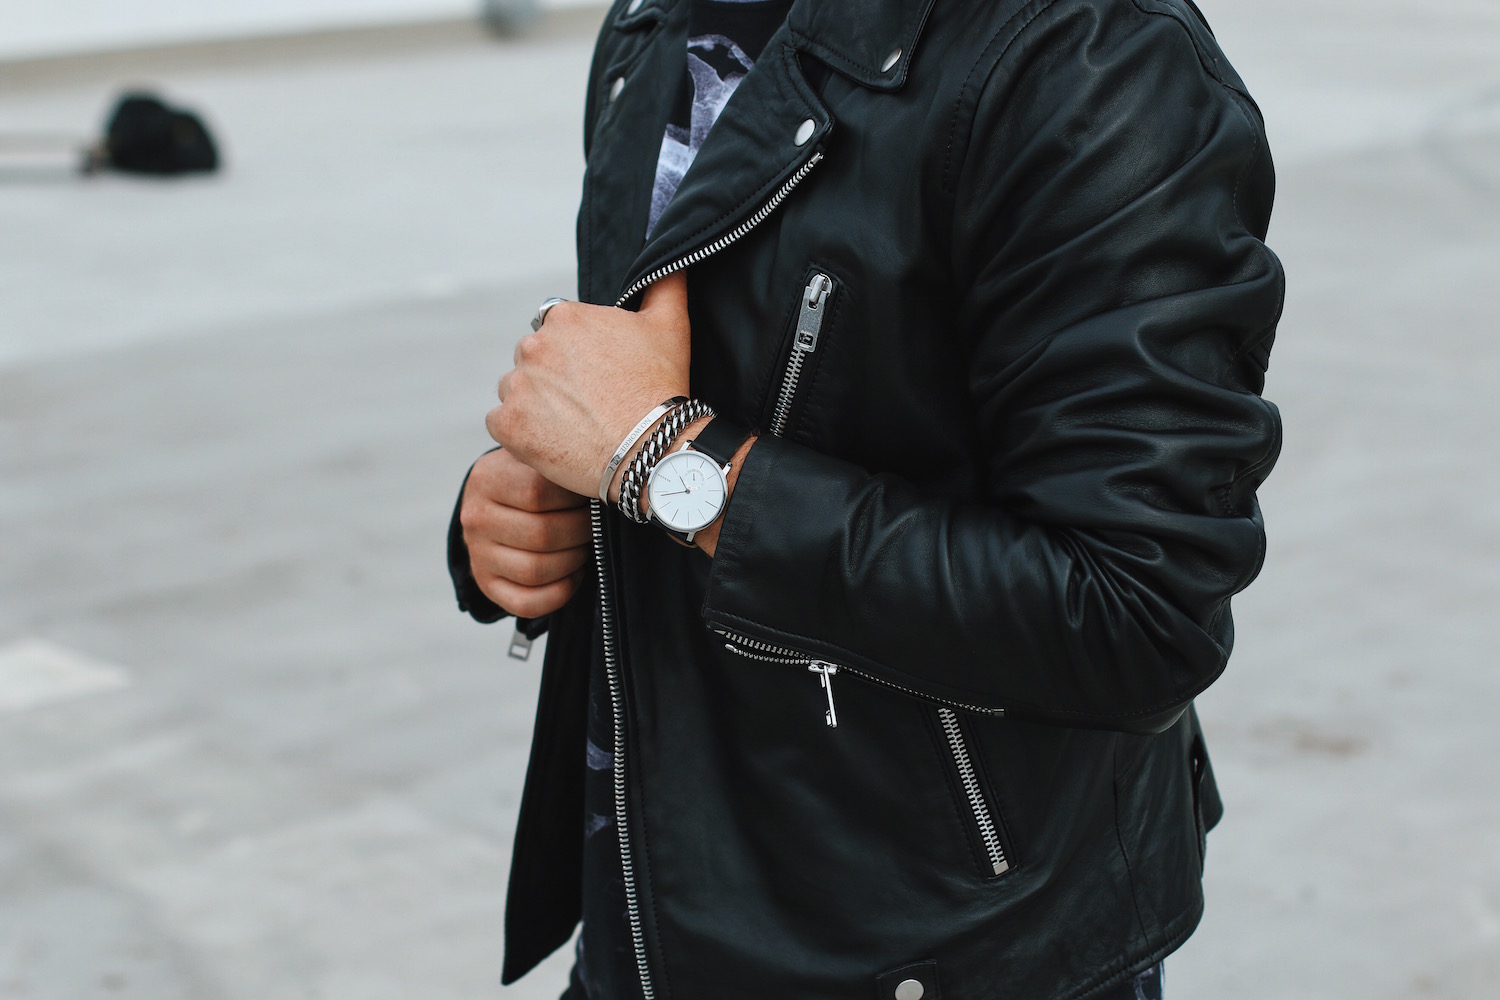 Meanwhile in Awesometown Austrian Mens Fashion Blogger_Diesel_Leather Biker Jacket_All Black_Floral Print